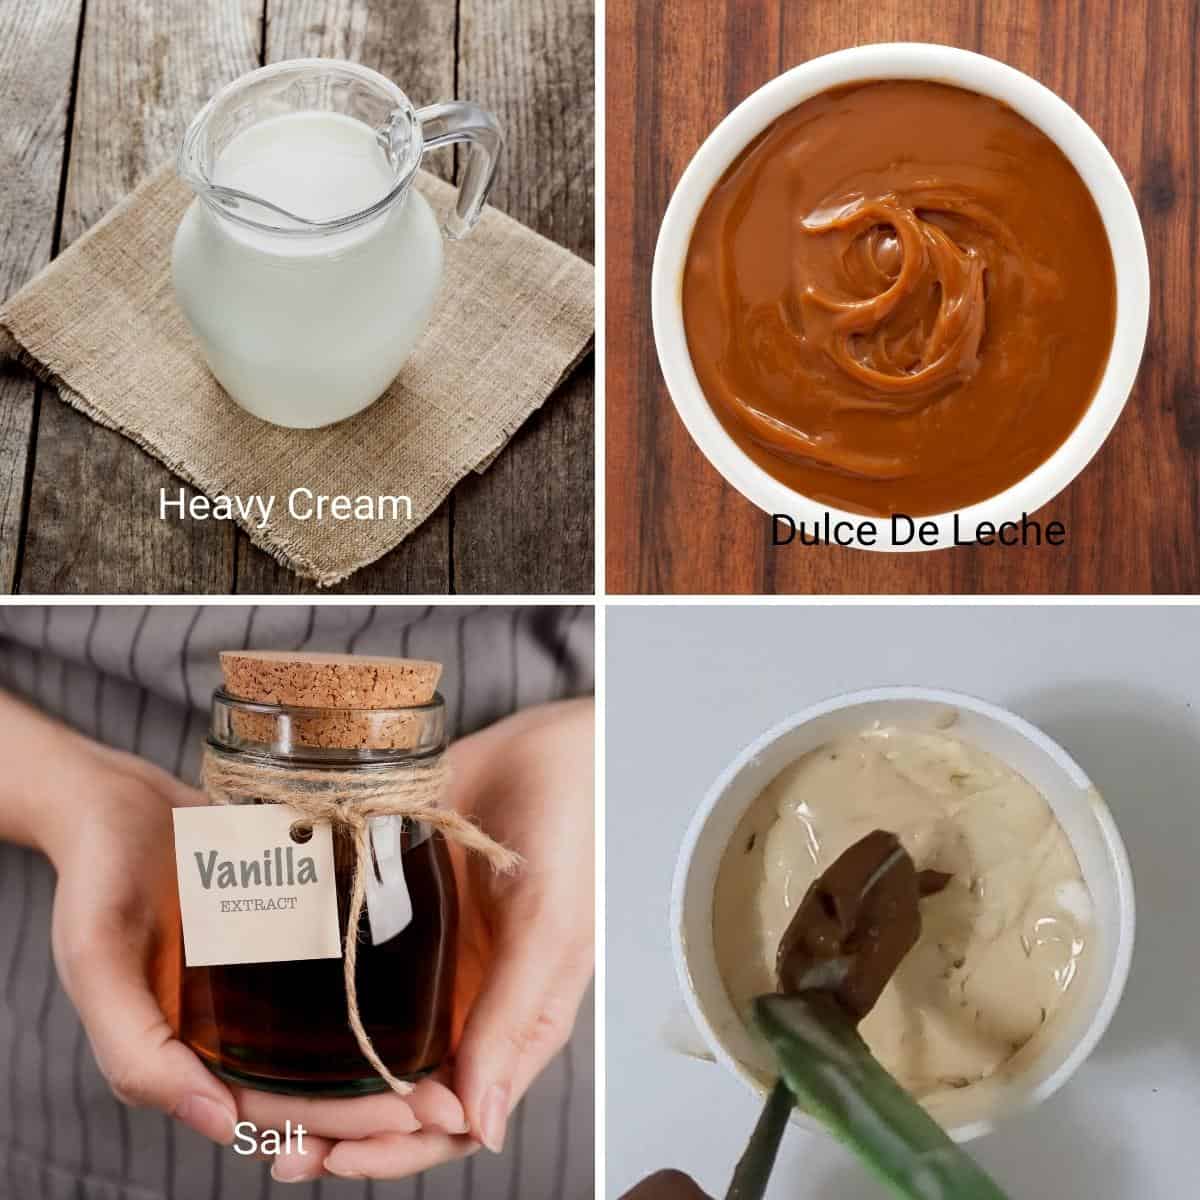 Ingredients for making ice cream with dulce de leche.